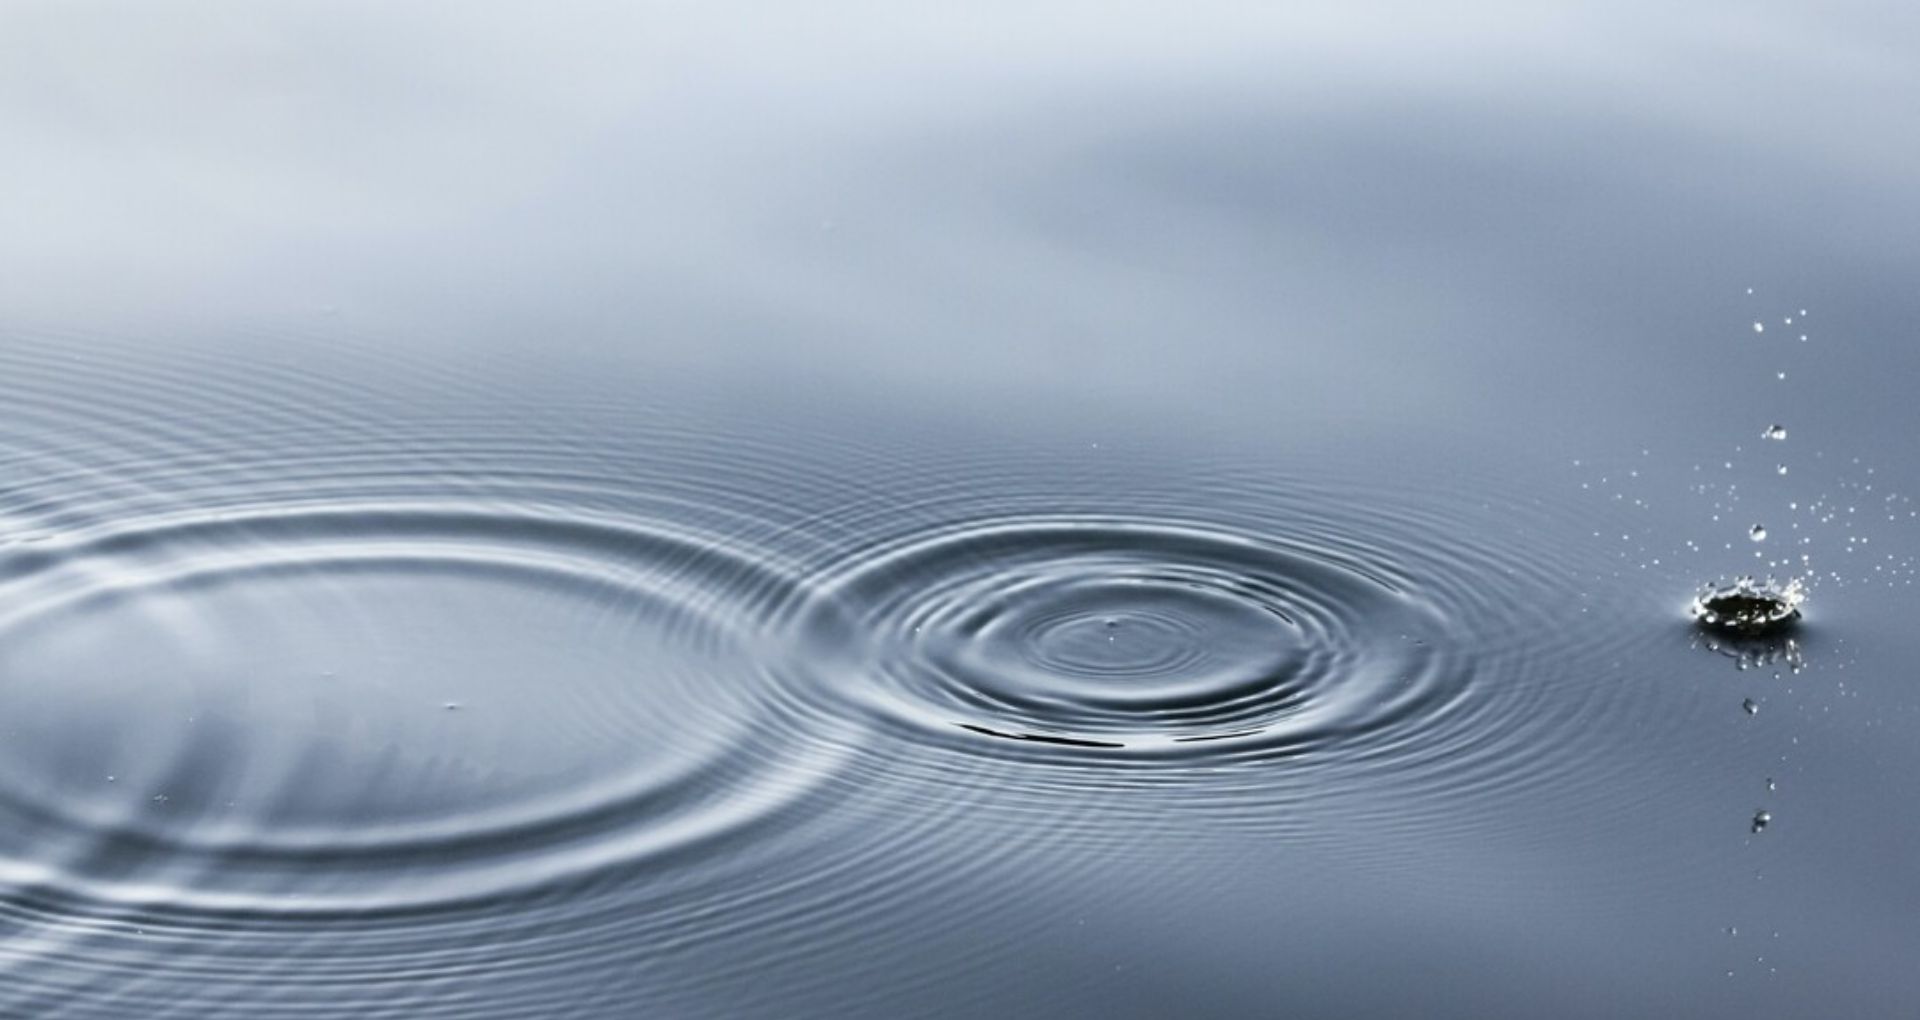 A water droplet creates distinct circular ripples in otherwise calm waters.